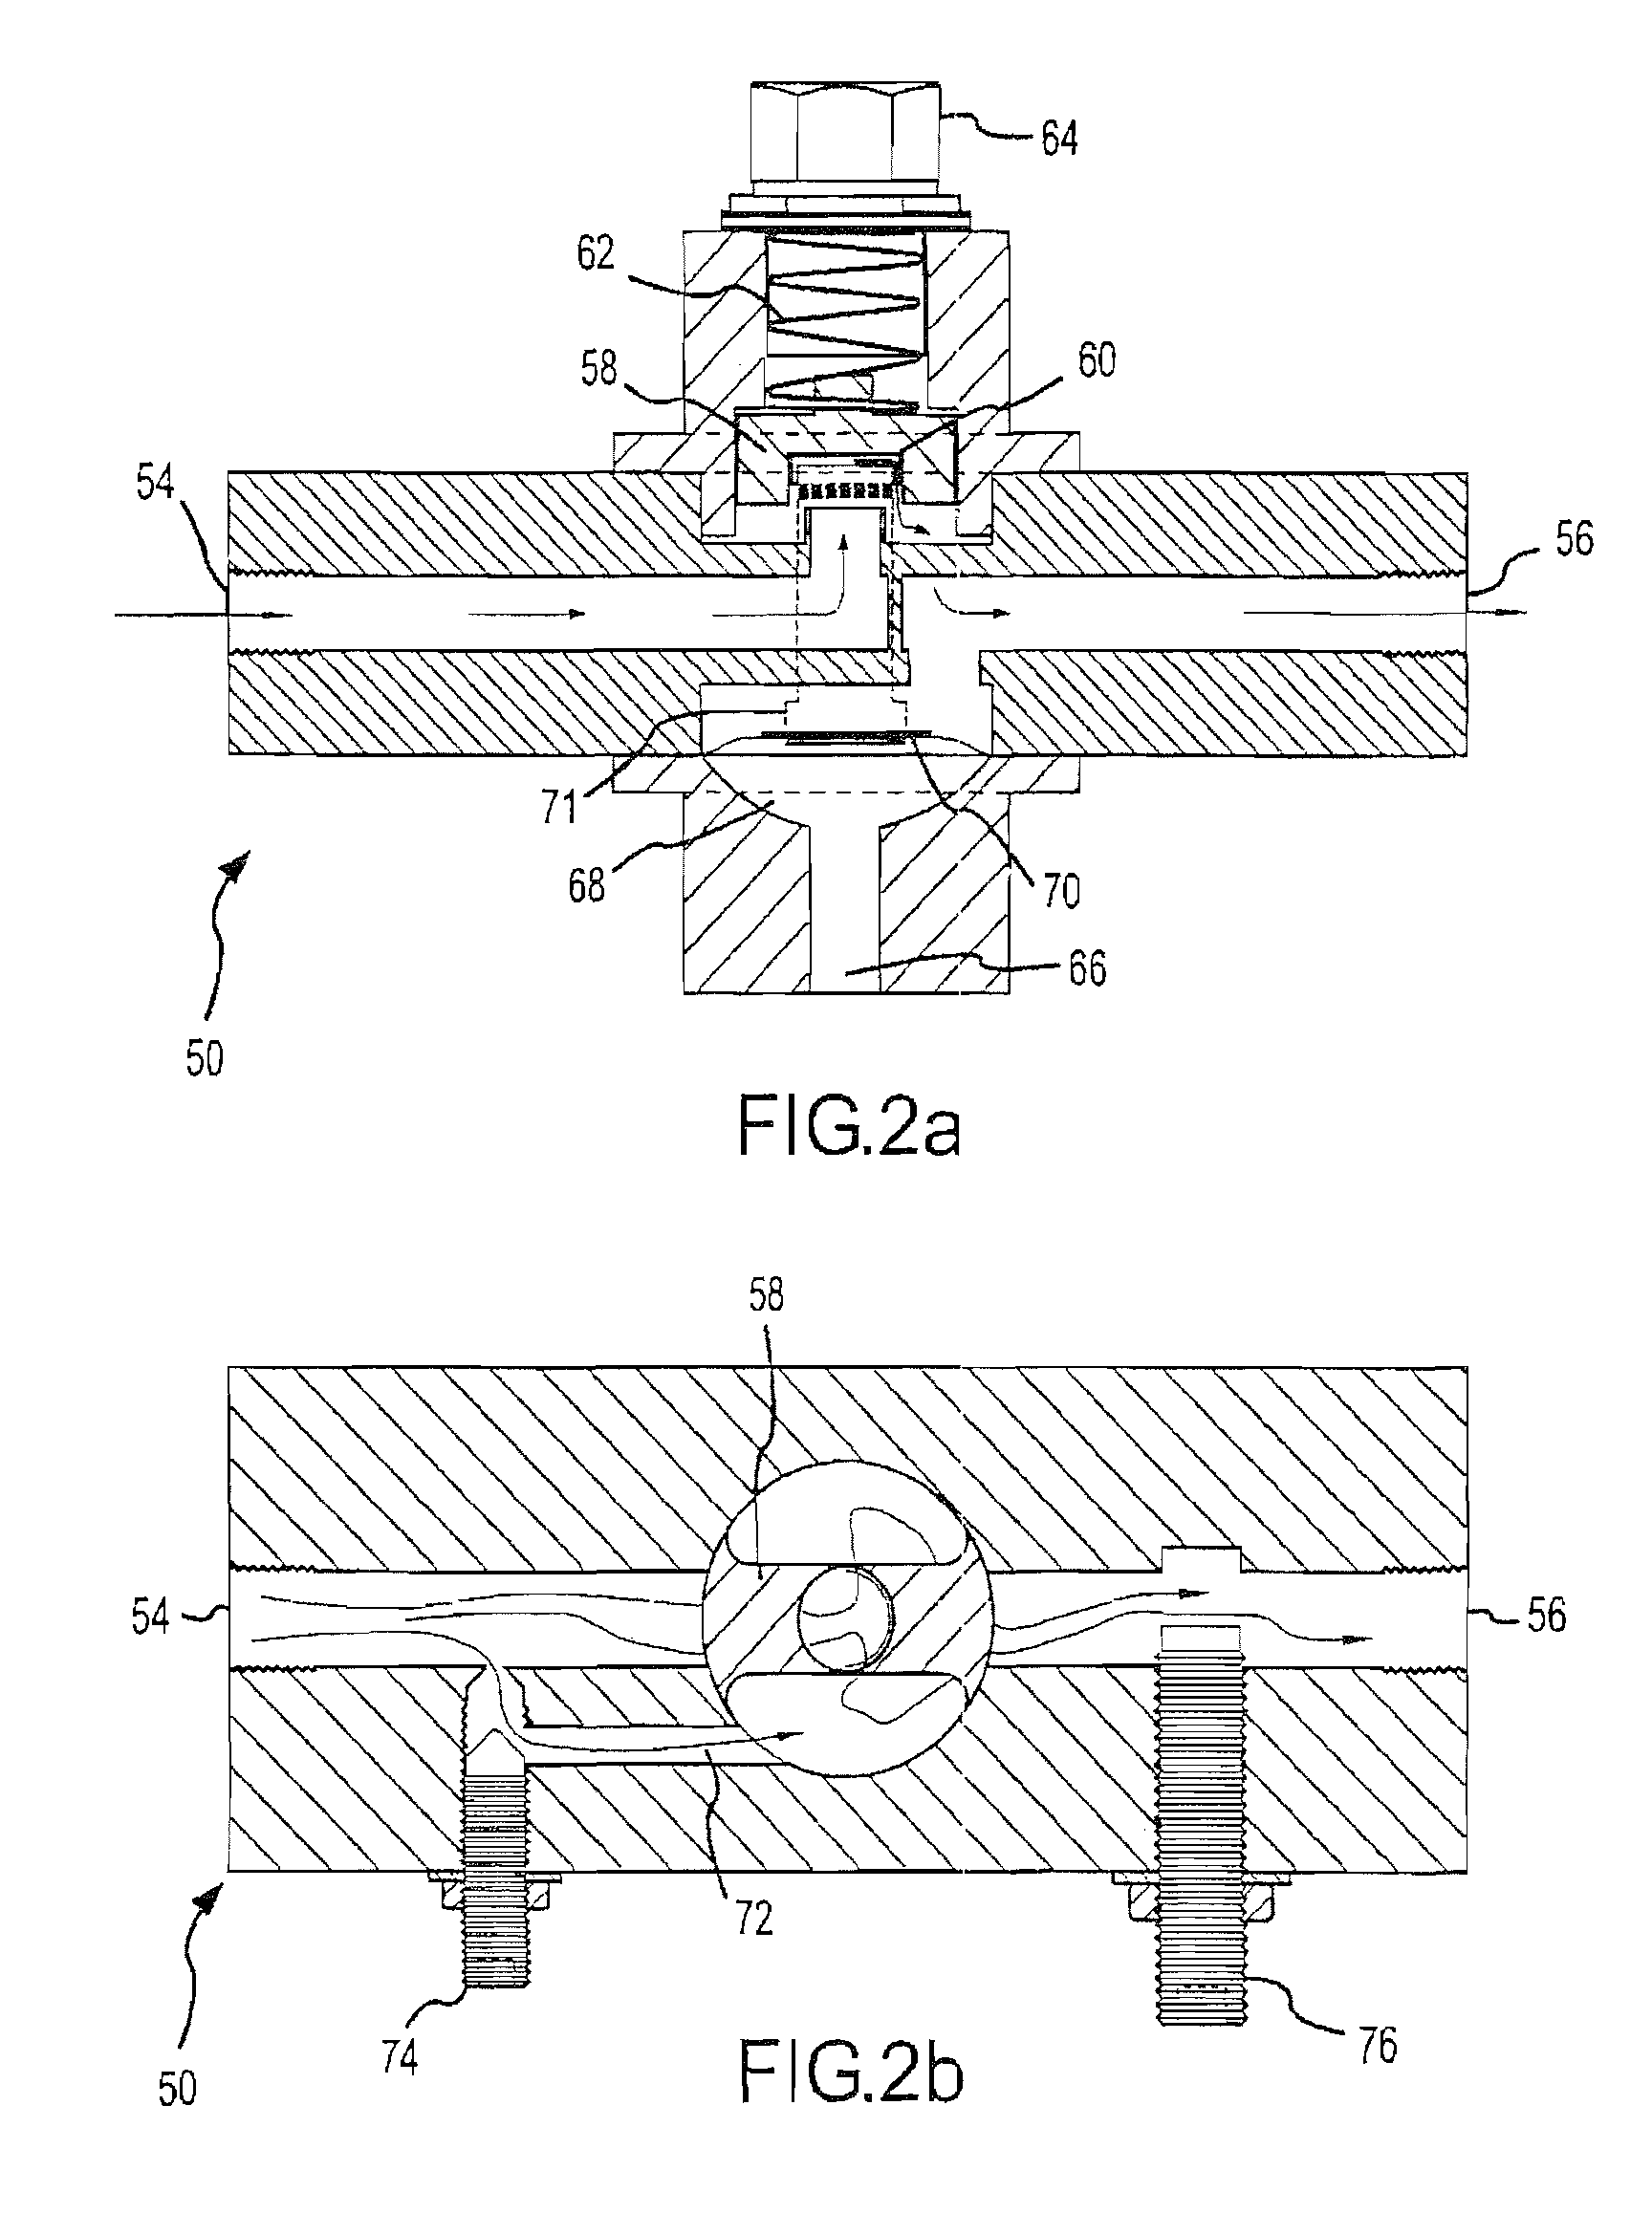 Process for use with dual-fuel systems